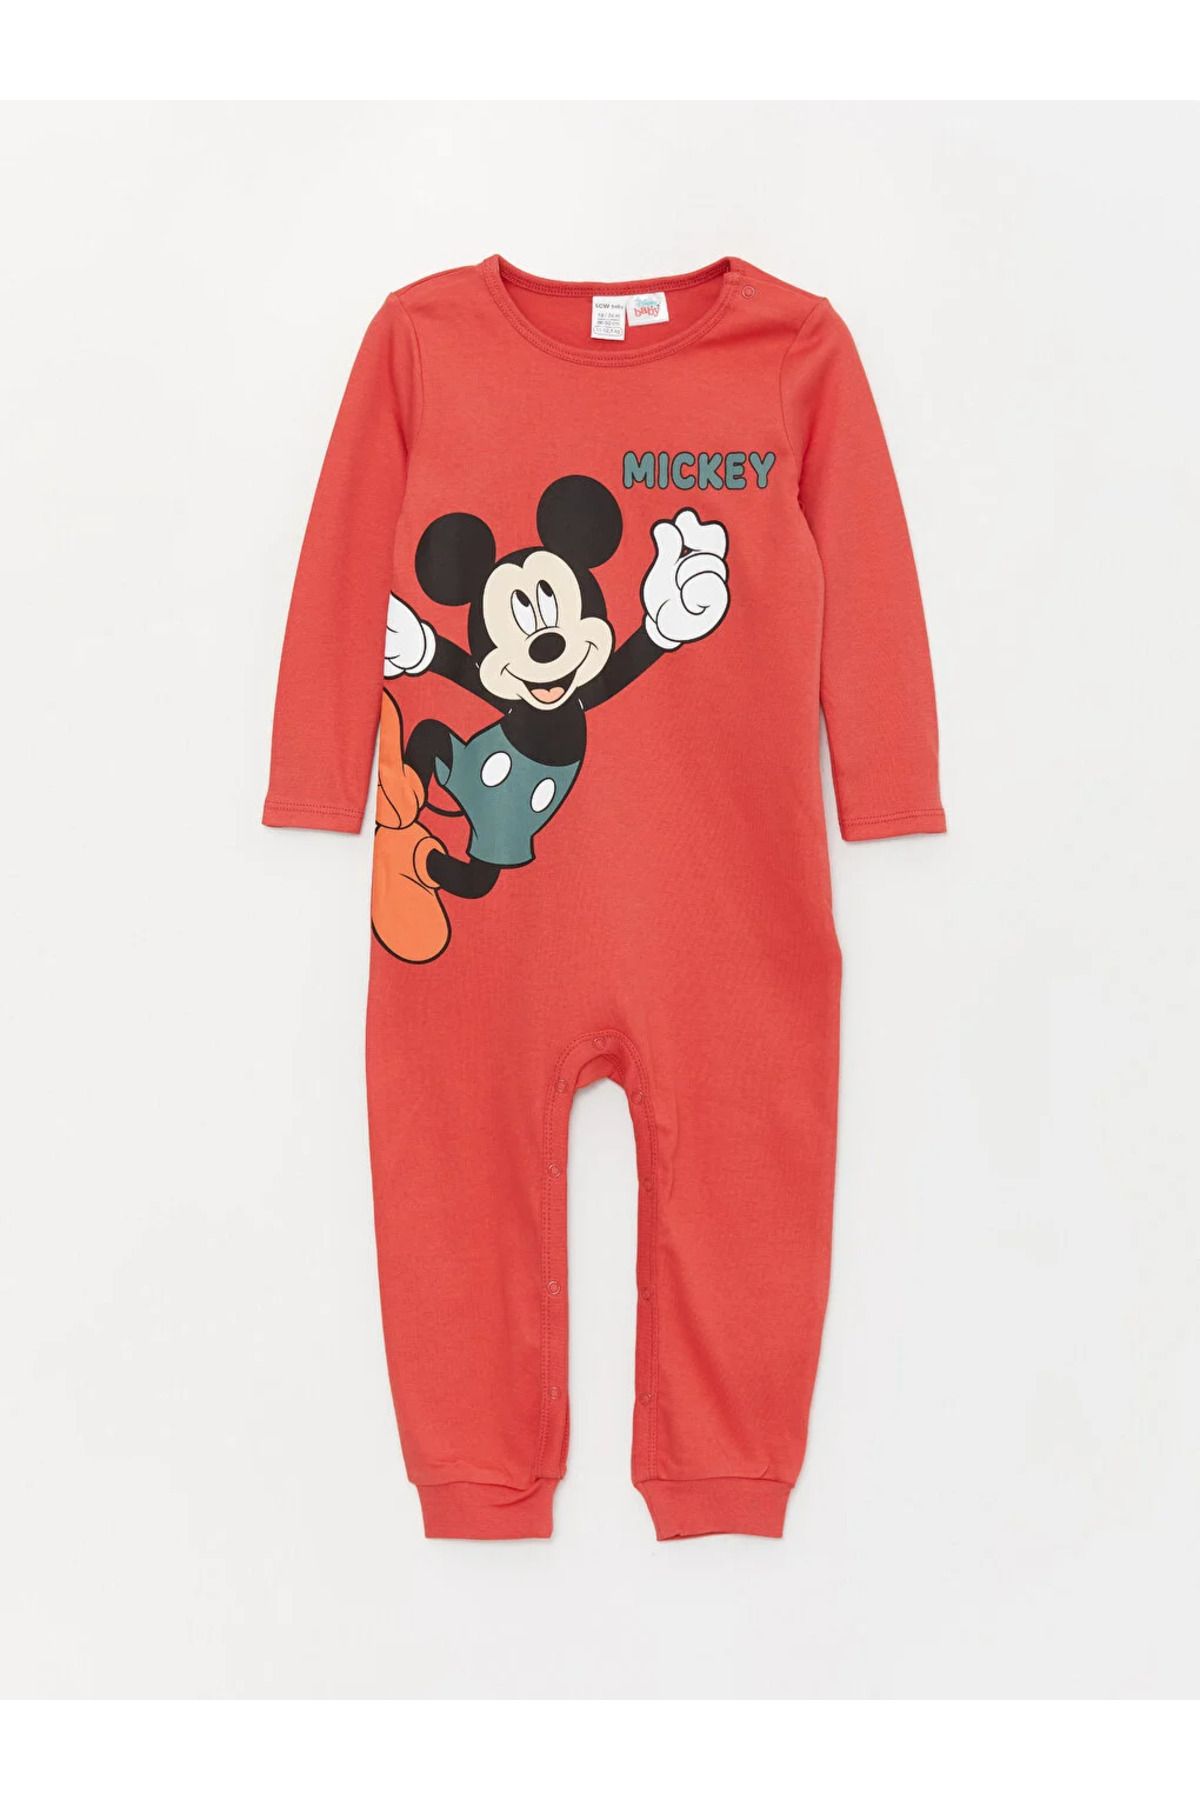 Red Toddler 1-Piece Mickey Mouse 100% Snug Fit Cotton Footie Pajamas |  skiphop.com